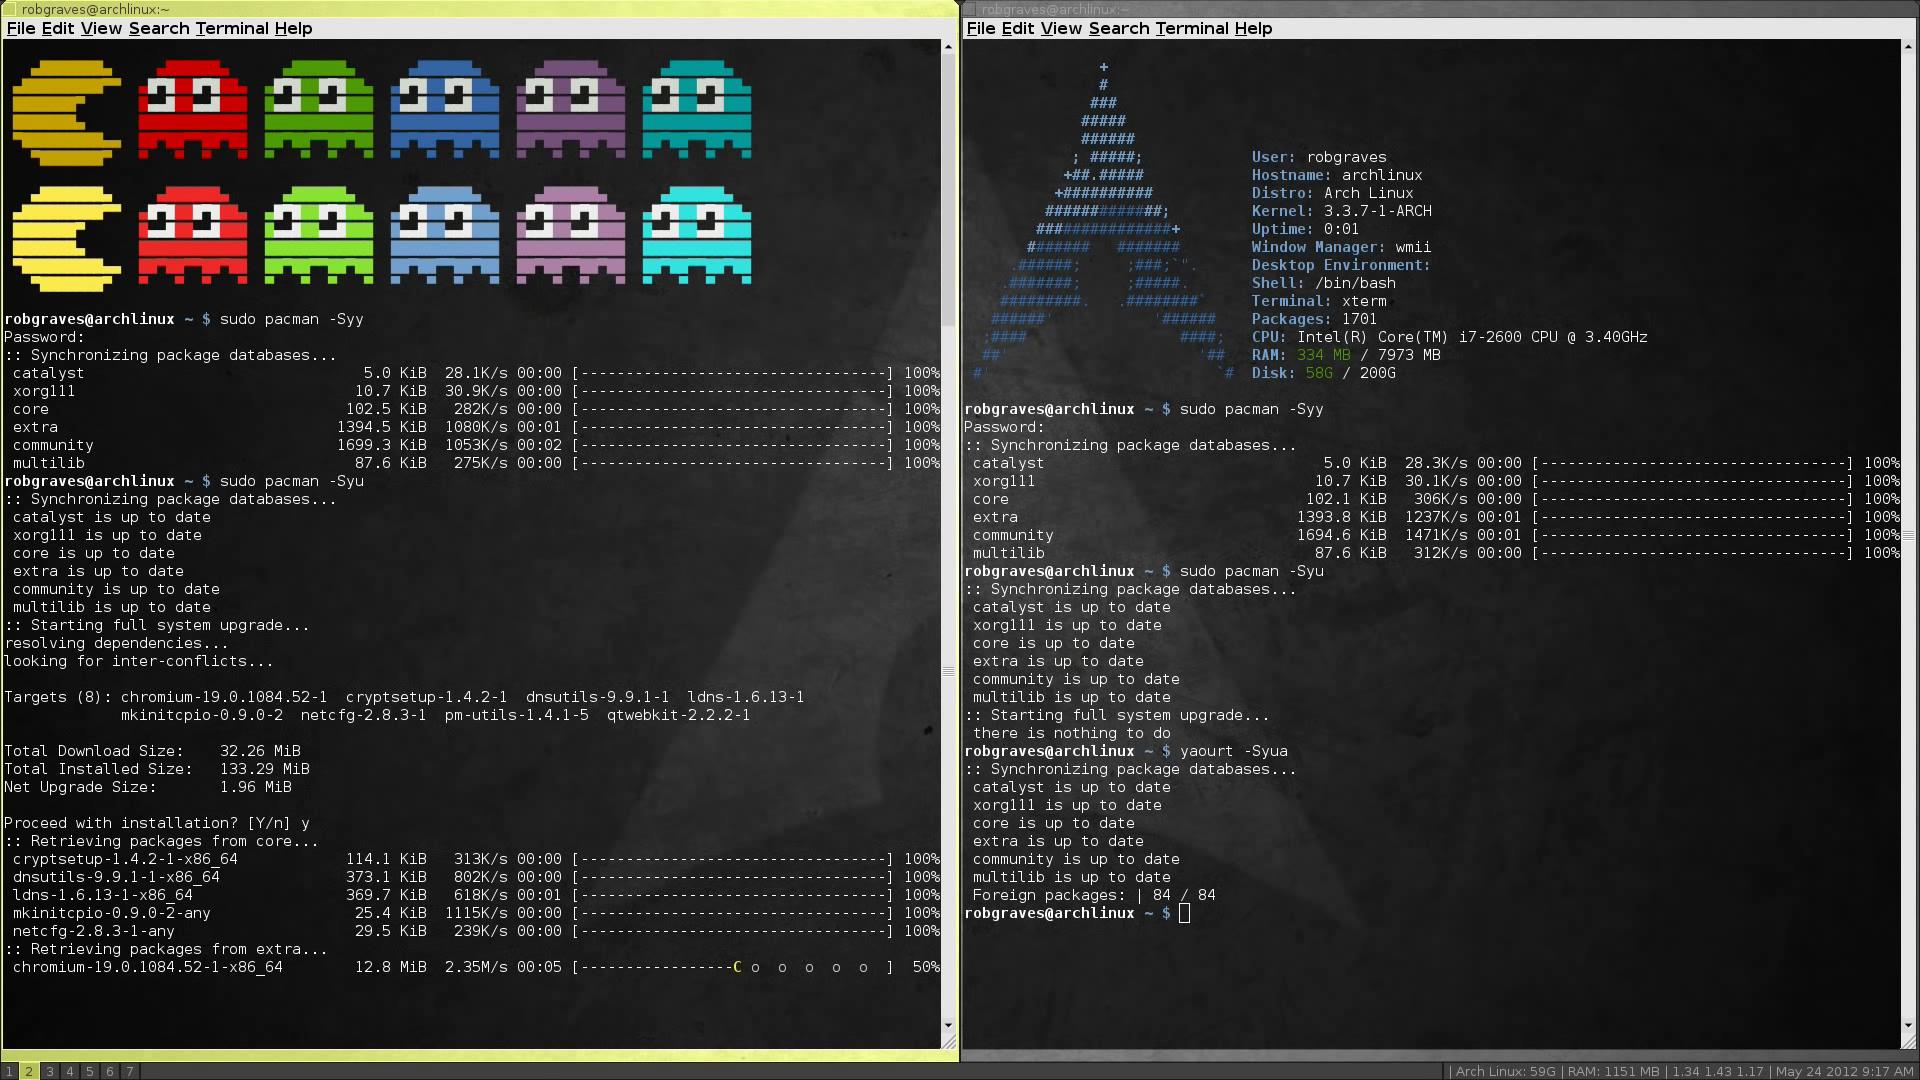 My actual desktop from a few years ago running Arch Linux with wmii tiling window manager